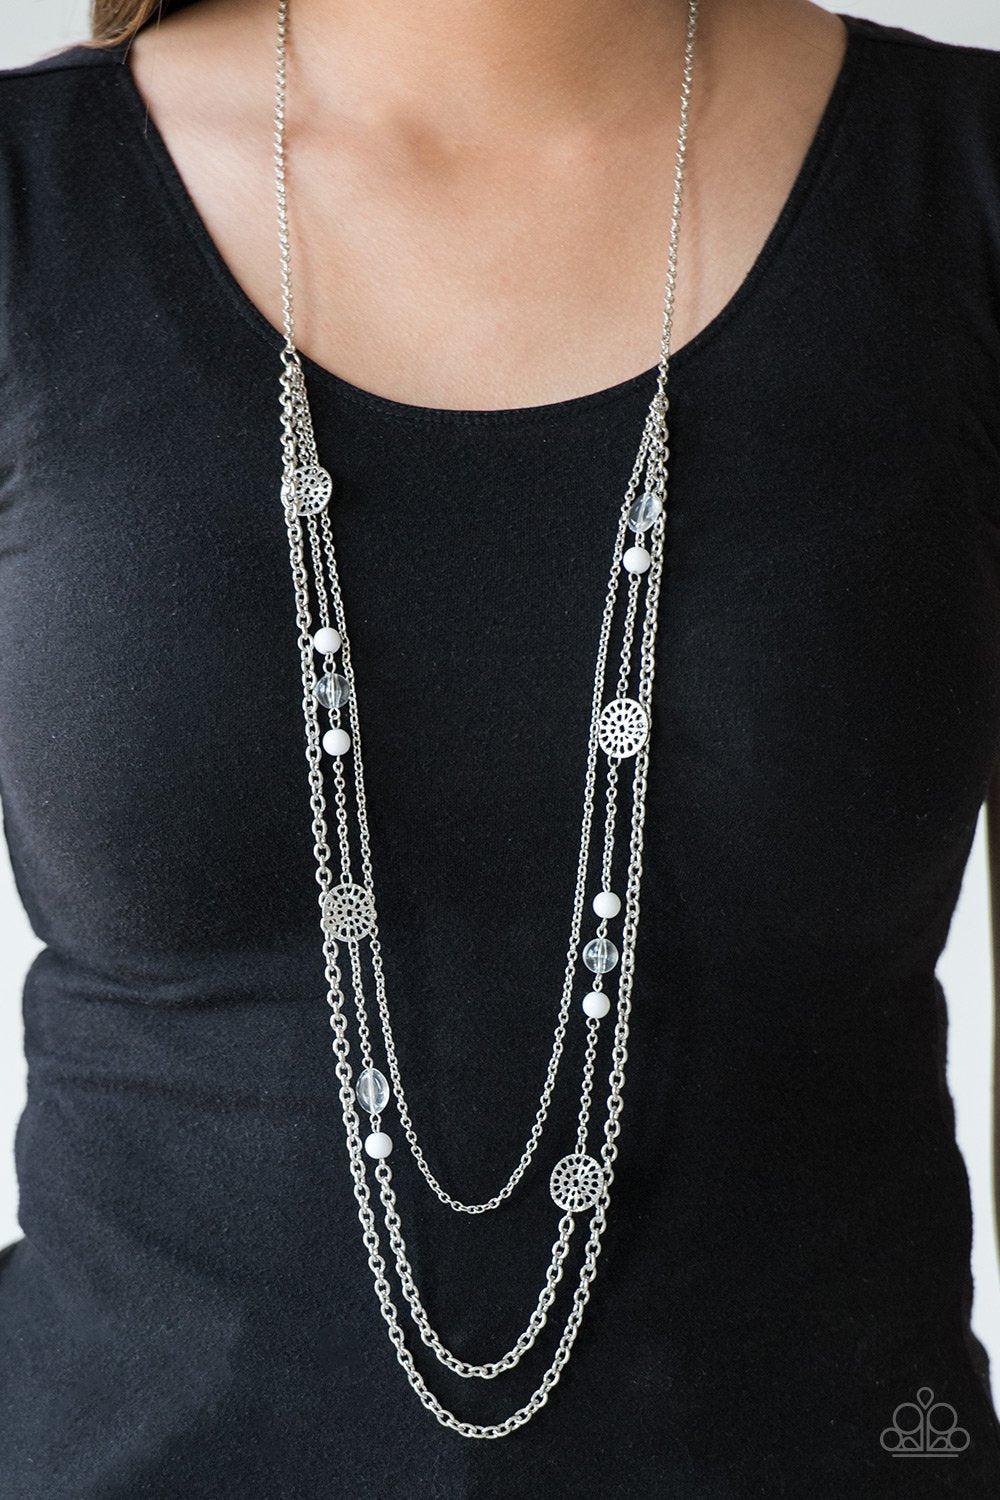 Pretty Pop-tastic Silver and White Necklace - Paparazzi Accessories-CarasShop.com - $5 Jewelry by Cara Jewels